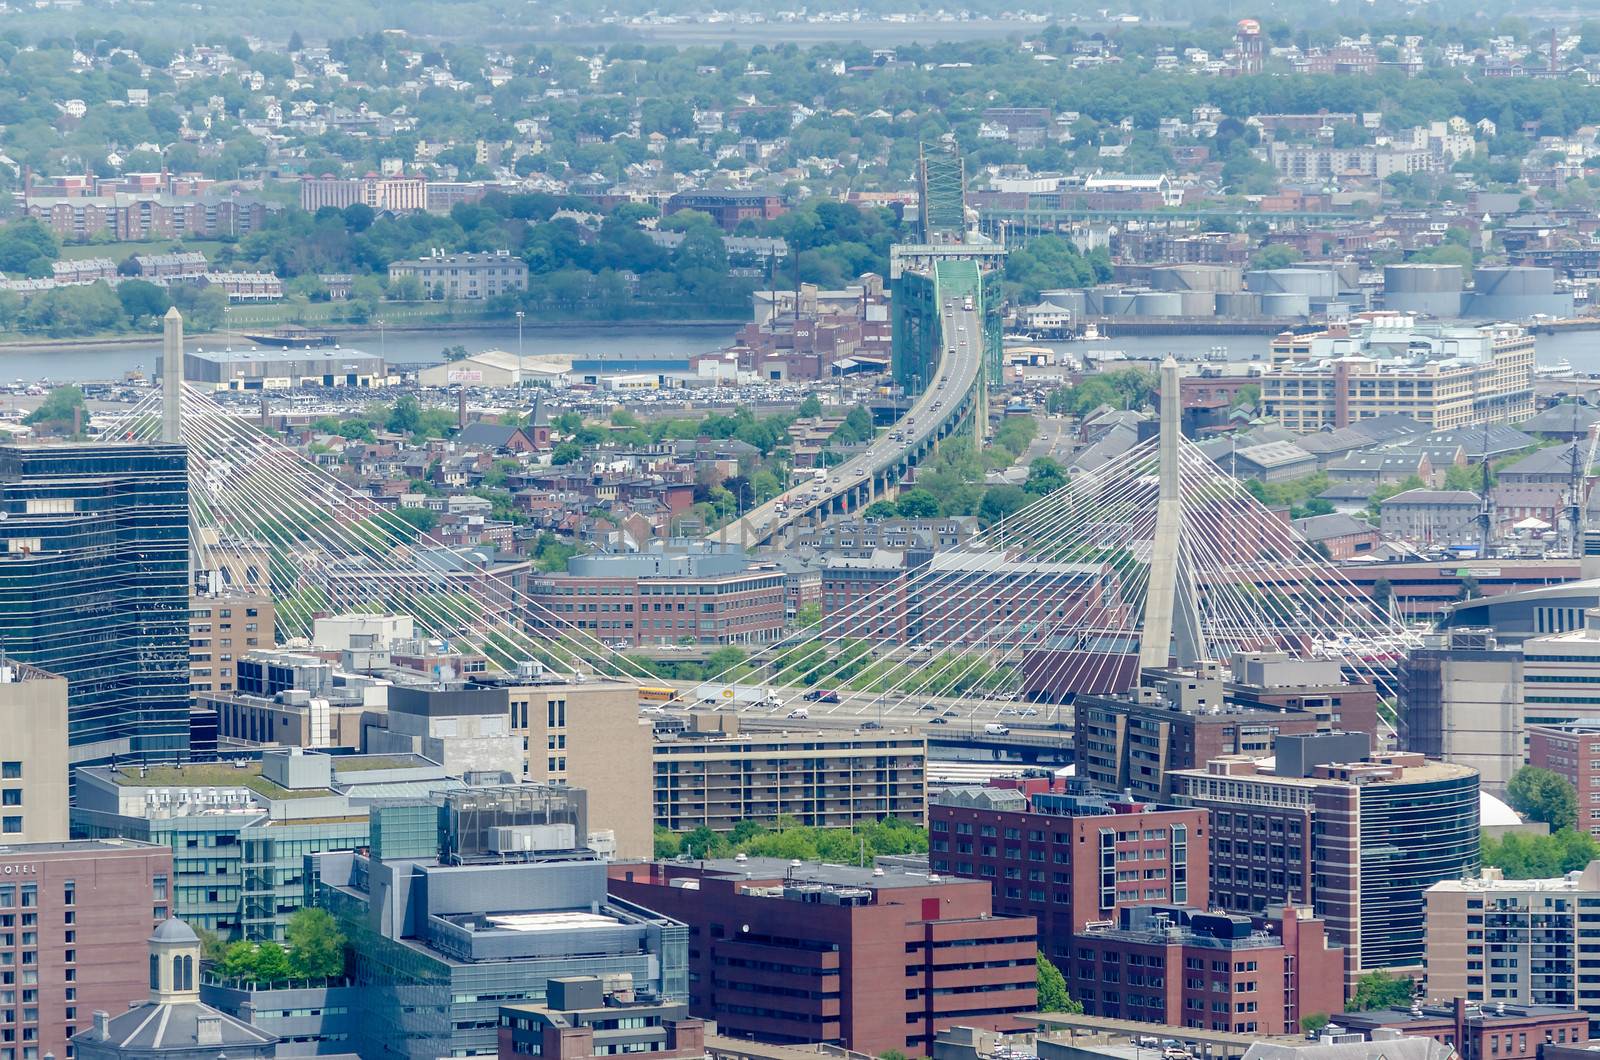 Aerial View of Central Boston from the Prudential Tower